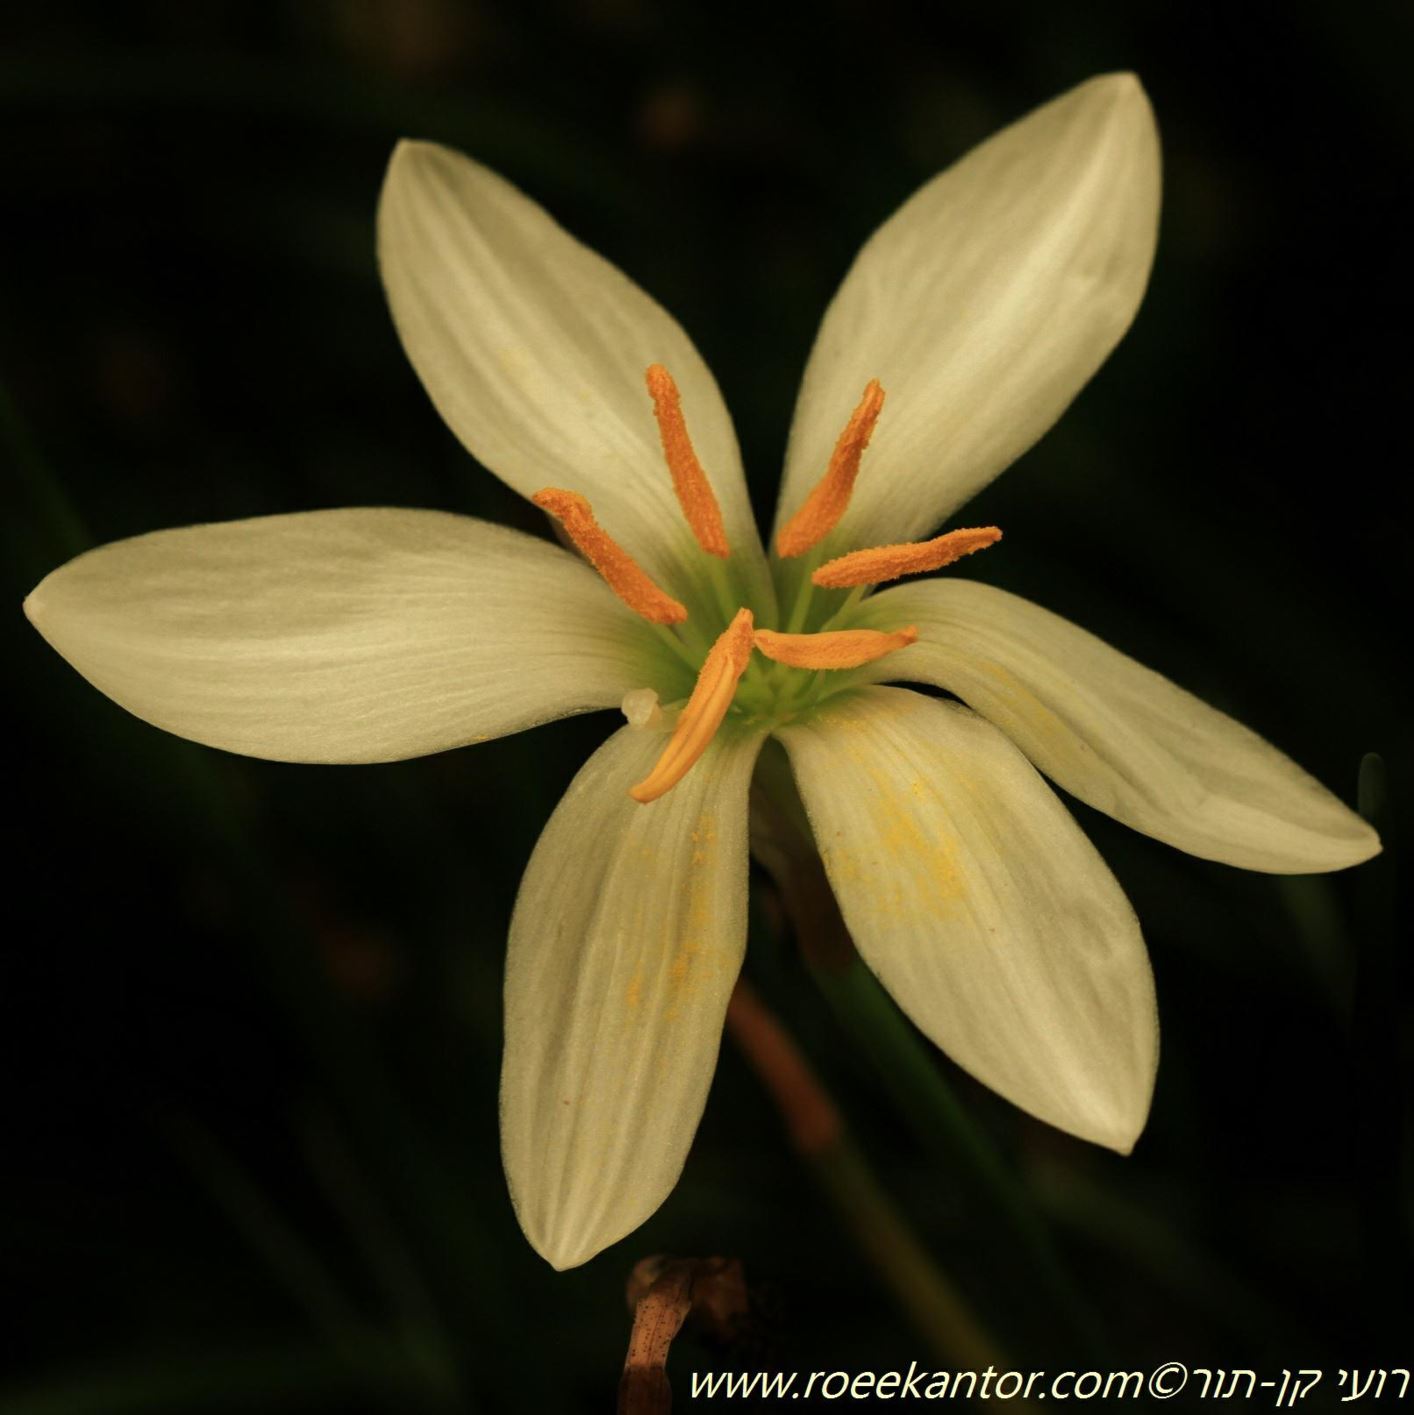 Zephyranthes candida - White Rain Lily, Flower of the West Wind, Storm Lily, זפירנתס צחור, זפירנתס צחור